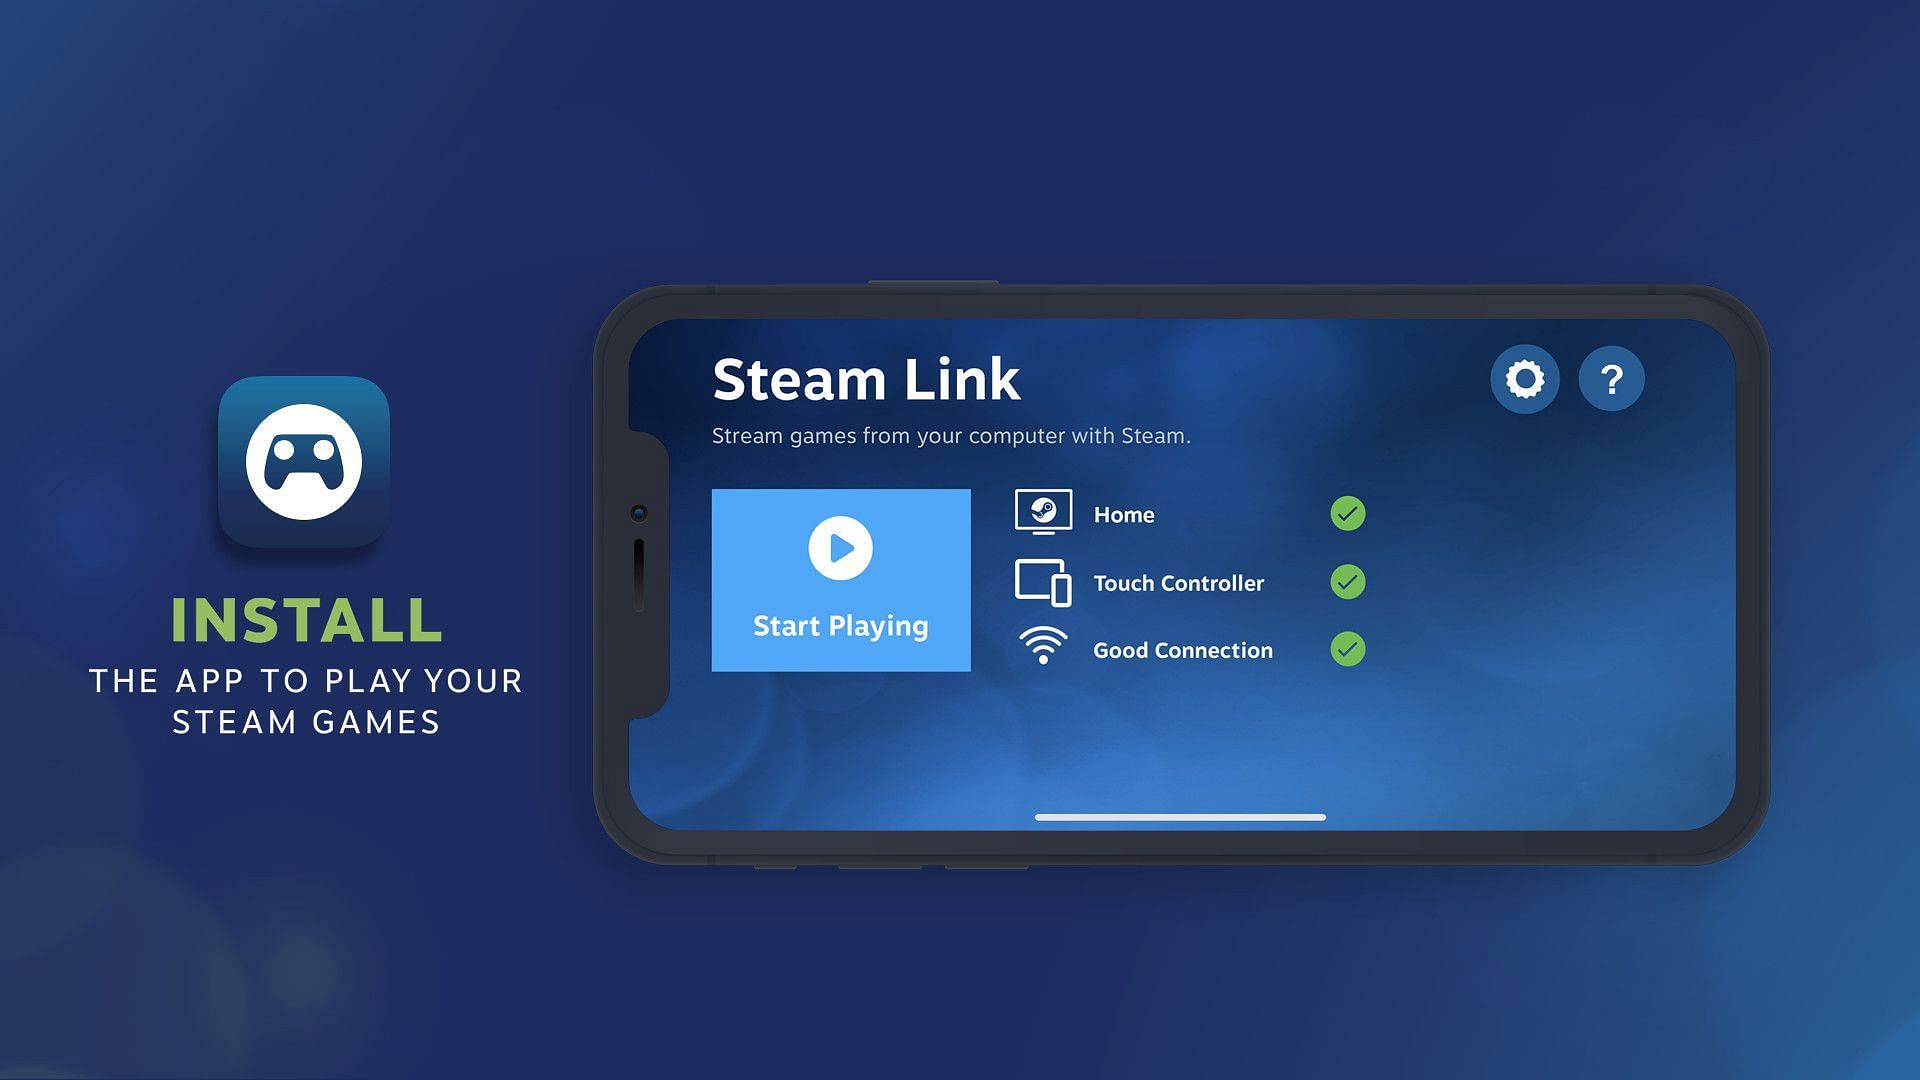 Play Steam games on smartphone with Steam Link (Image via Steam)